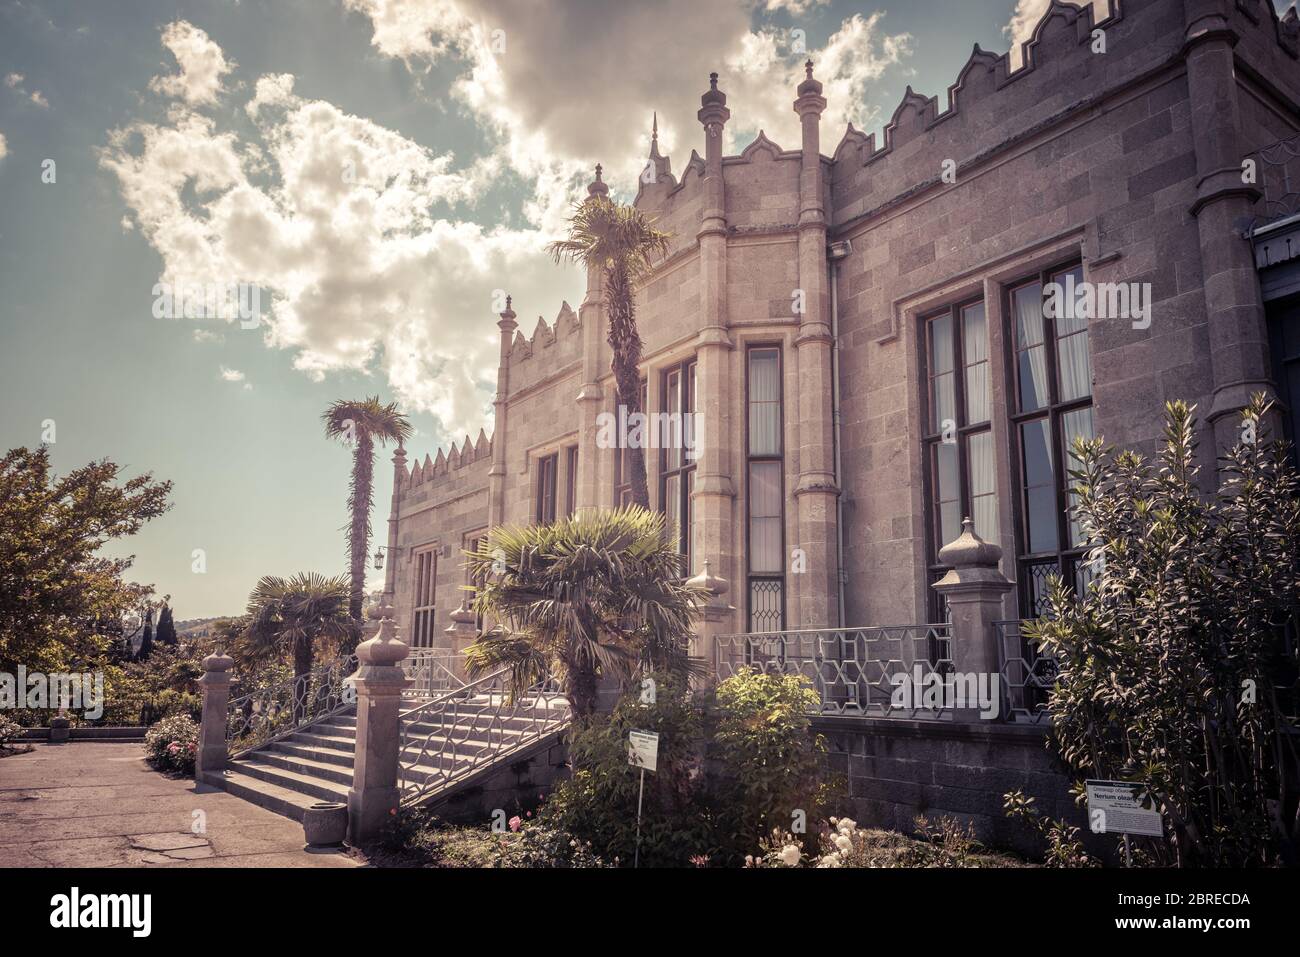 Alupka, Crimea - May 20, 2016: Southern facade of Vorontsov Palace in Crimea, Russia. It is one of the main tourist attractions of Crimea. Vintage vie Stock Photo